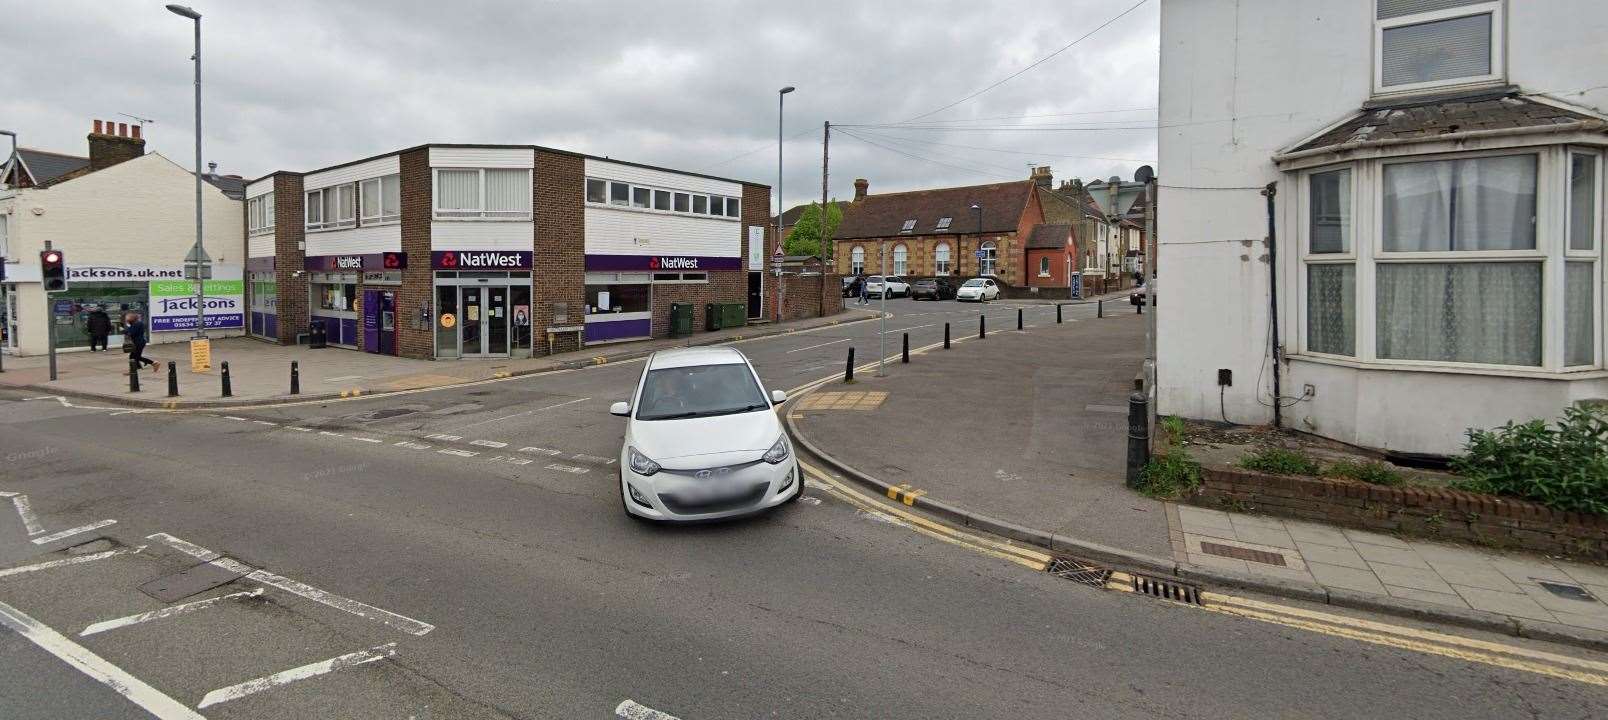 The cameras would also monitor the right-turn ban into Orchard Street from the High Street in Rainham. Photo: Google